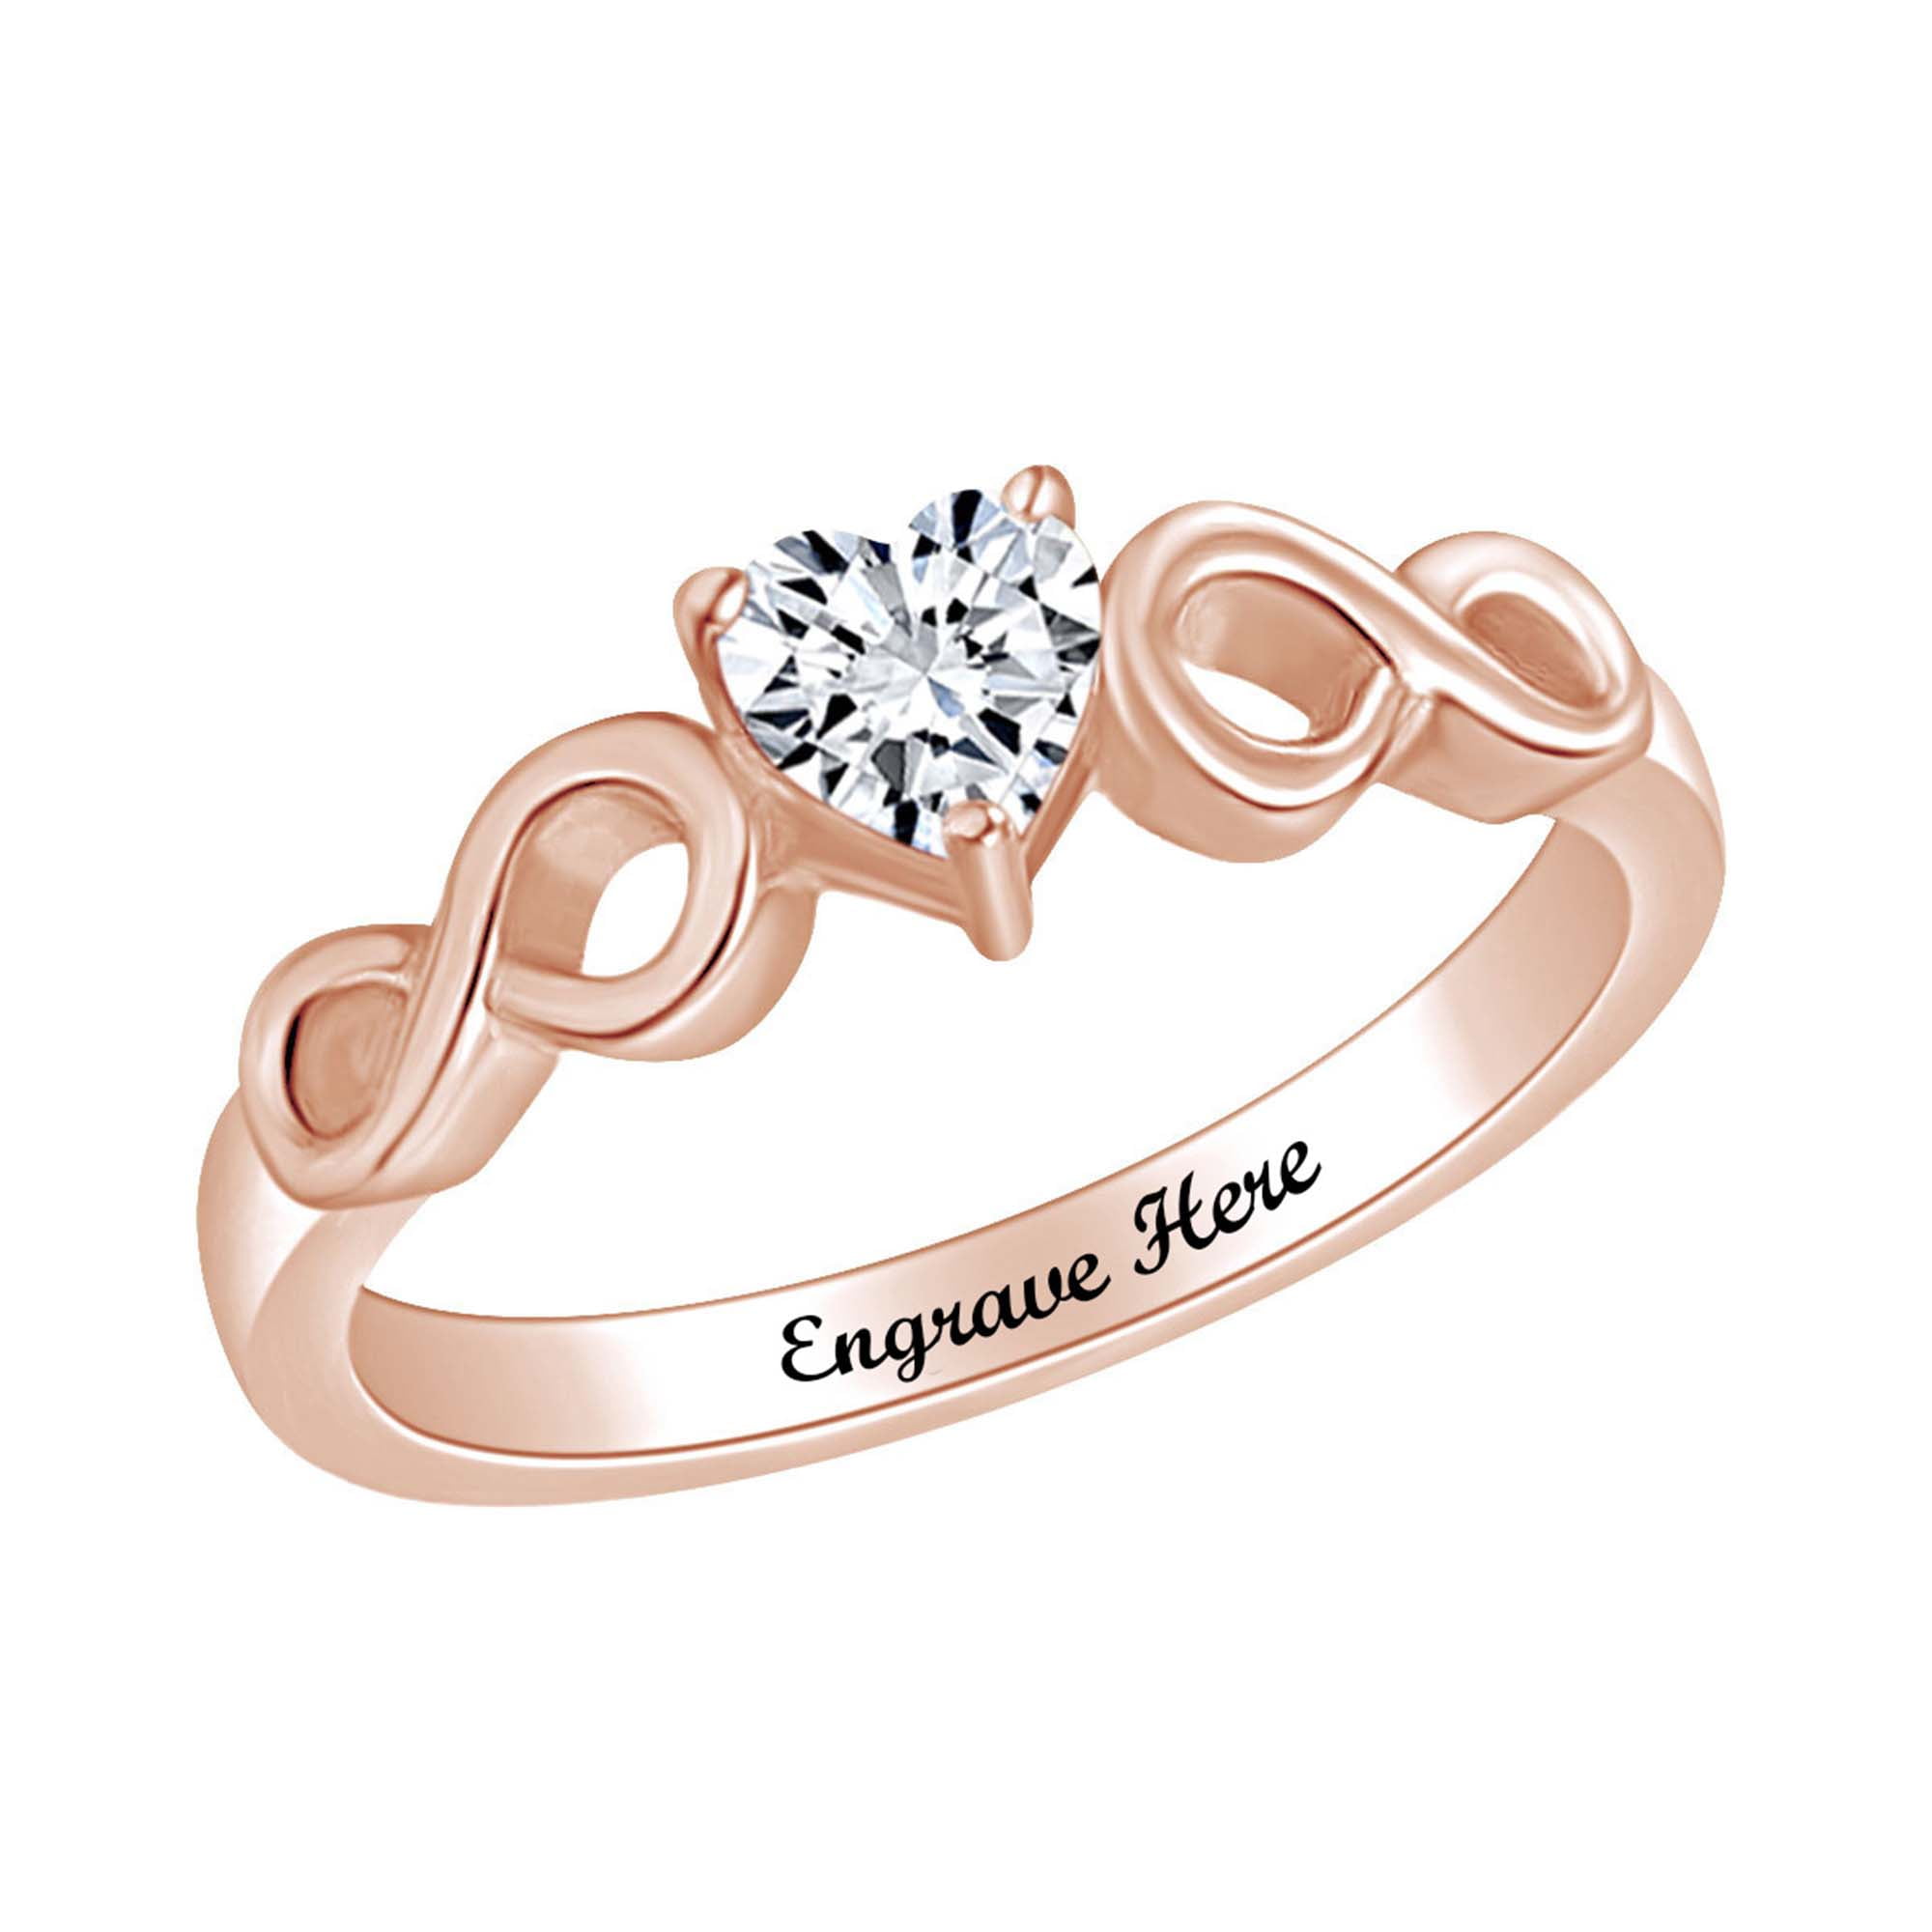 AFFY Round Cut White Cubic Zirconia Infinity Heart Promise Ring in 14k Gold Over Sterling Silver